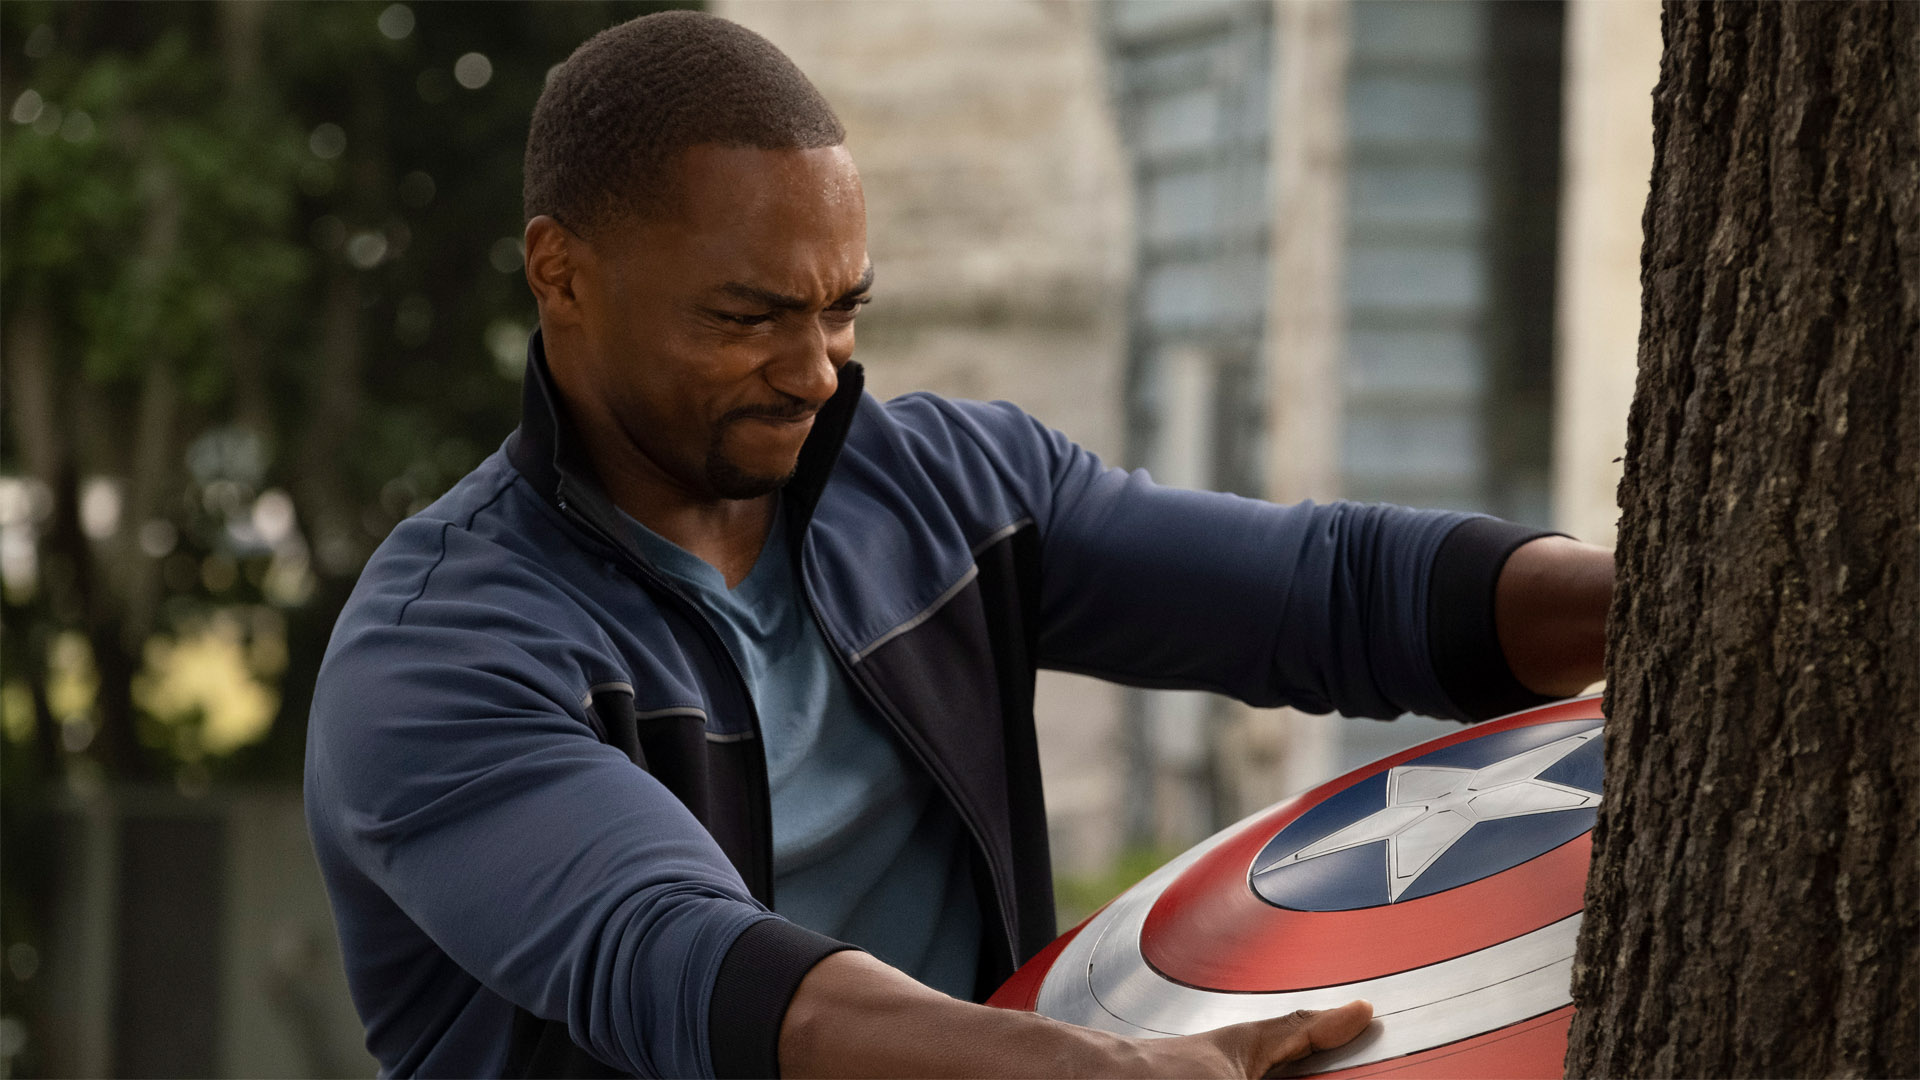 The Falcon And The Winter Soldier Episode 5 Recap Let Down By A Rushed